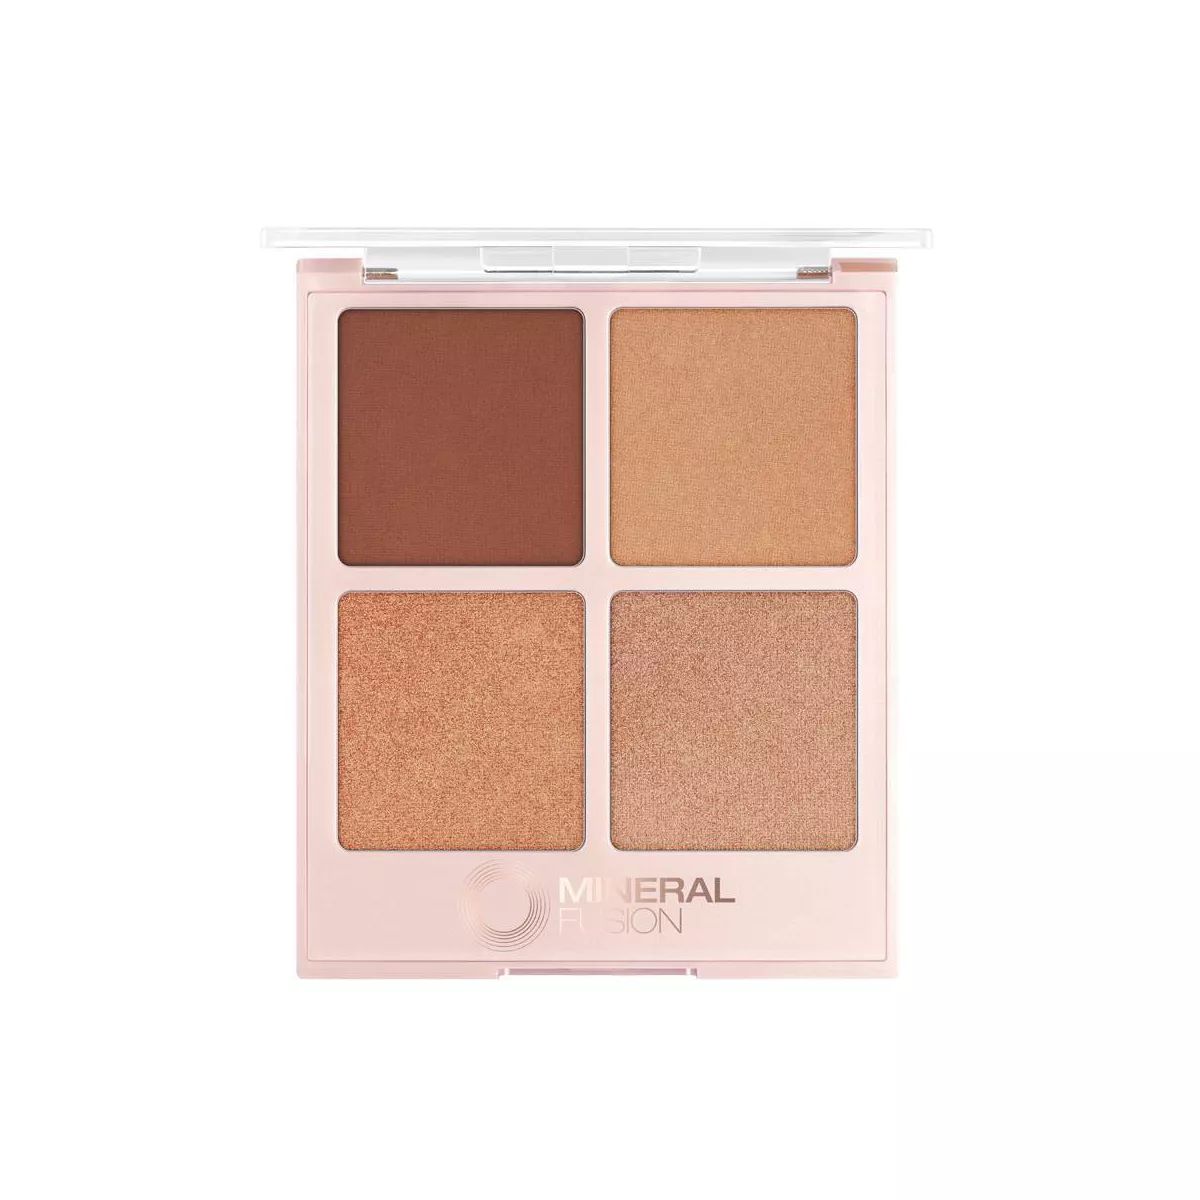 Mineral Fusion Bronzer Palette - Pool Party - 0.45oz | Target